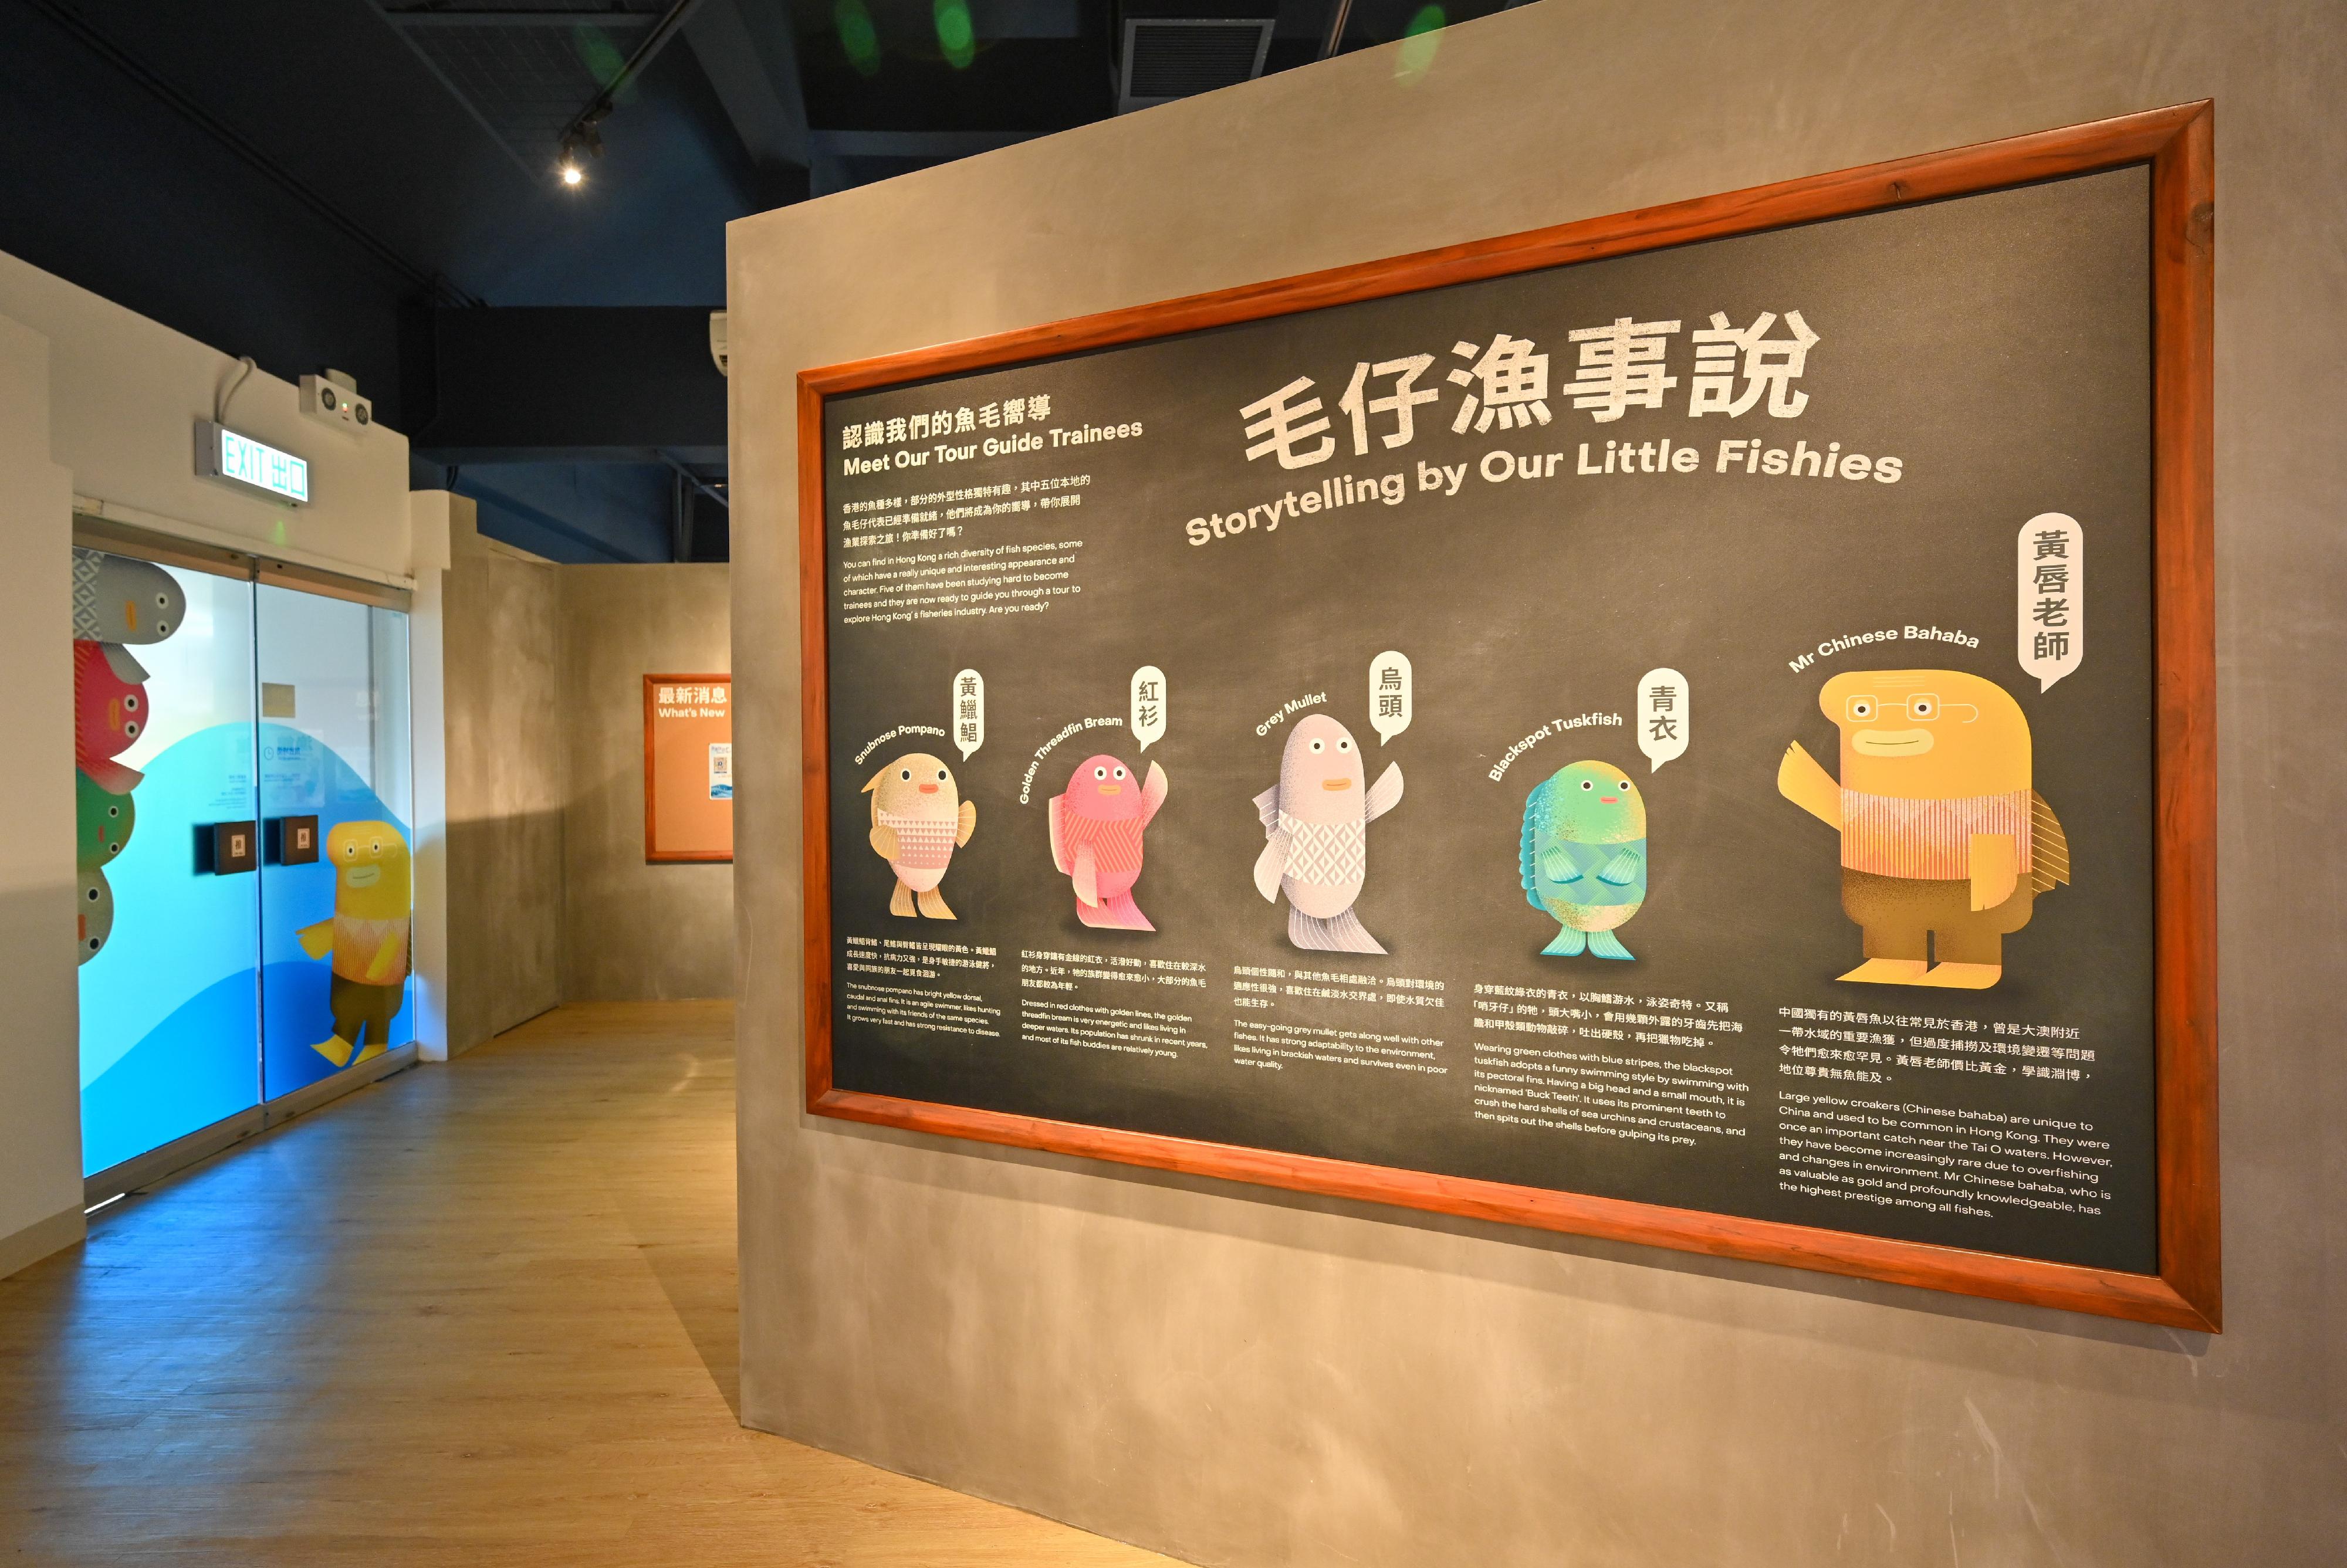 The Fisheries Hall located at the Lions Nature Education Centre at Tsiu Hang, Sai Kung, reopened today (December 16) upon completion of its revamp. Photo shows the five mascots of the Hall - (from right) Mr Chinese Bahaba, Blackspot Tuskfish, Grey Mullet, Golden Threadfin Bream and Snubnose Pompano.